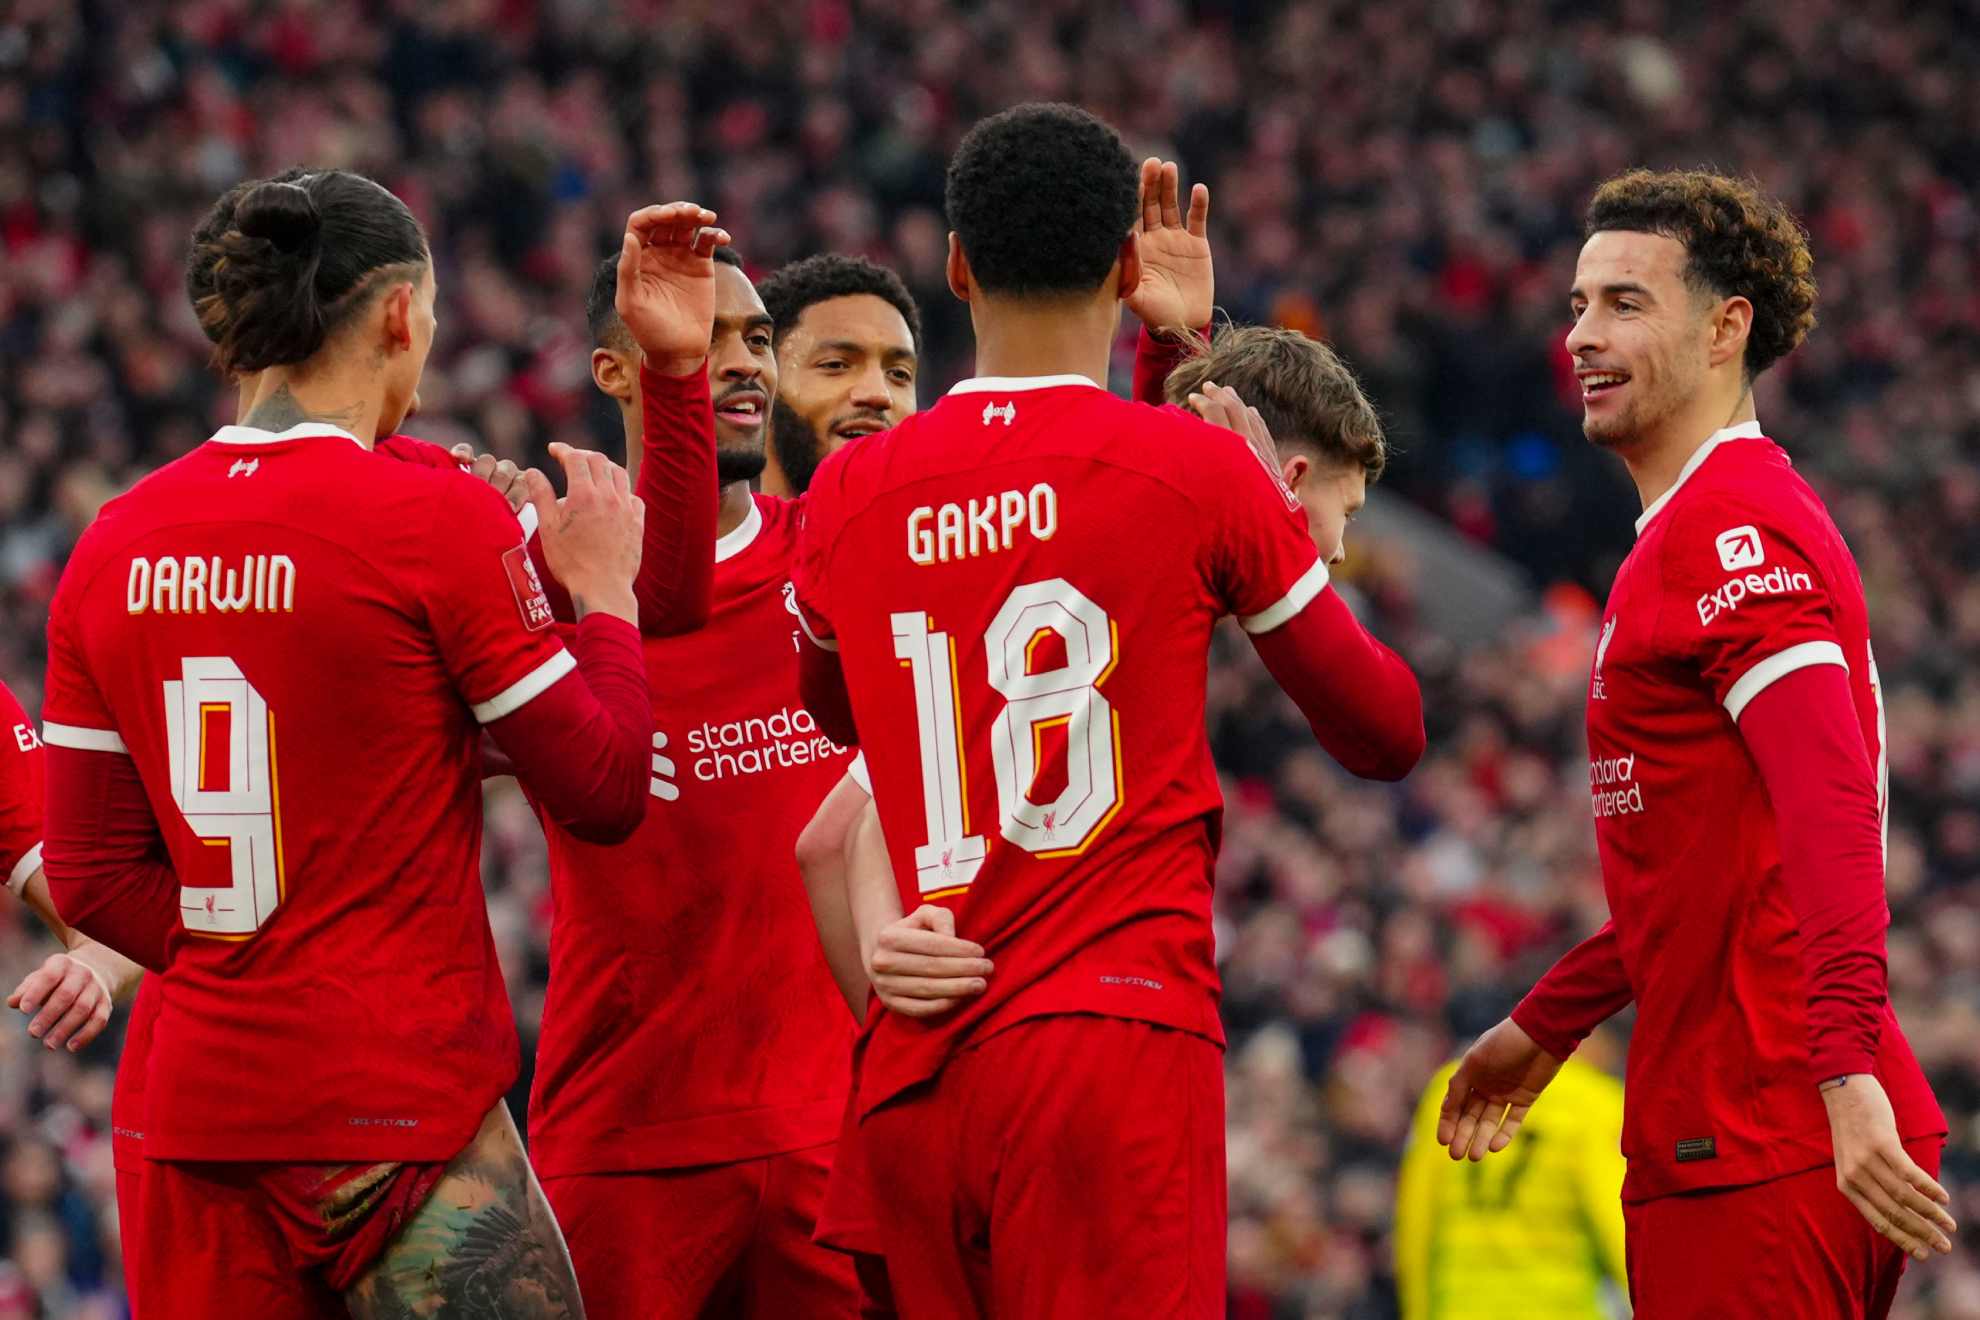 Liverpool players celebrate after scoring